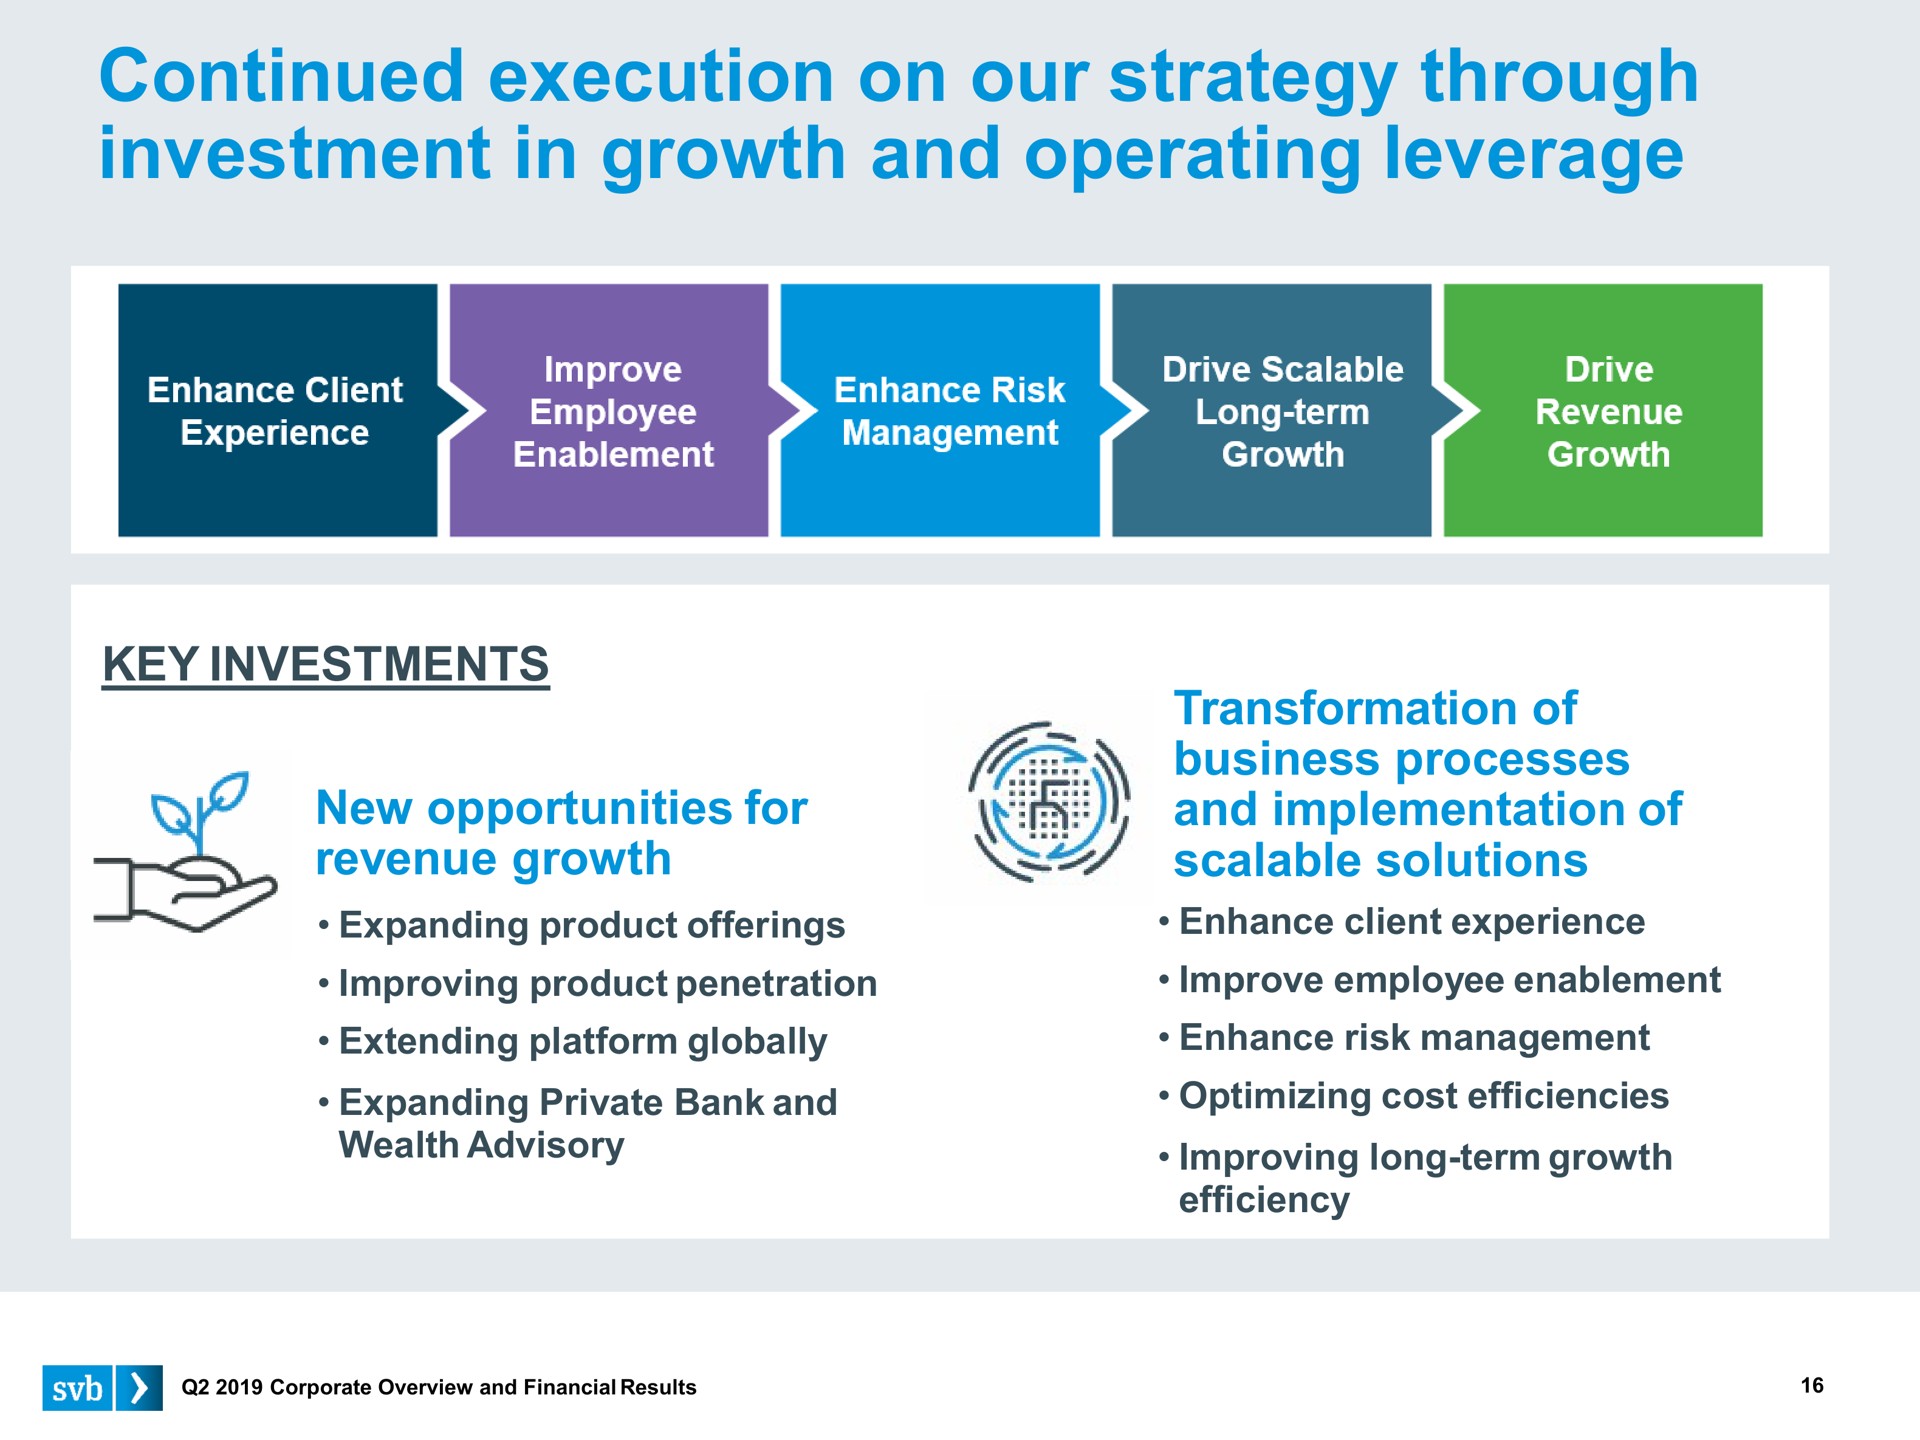 continued execution on our strategy through investment in growth and operating leverage | Silicon Valley Bank